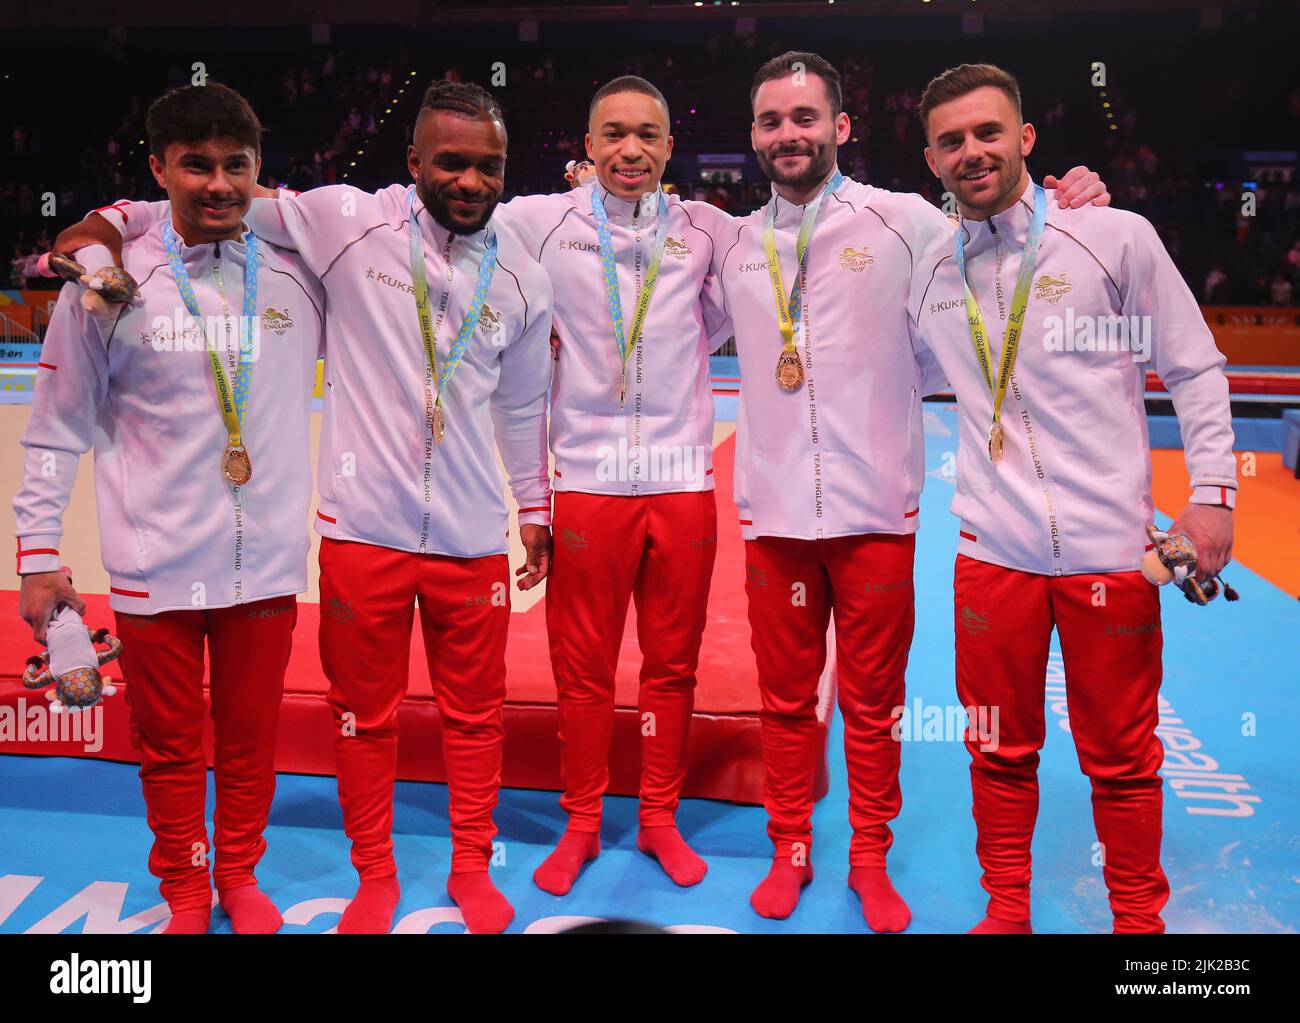 Birmingham, UK. 29th July 2022. The English team celebrate after winning Gold in the Gymnastics Mens team final during Day One of the Commonwealth Games, Birmingham. Credit: Paul Terry Photo/Alamy Live News Stock Photo